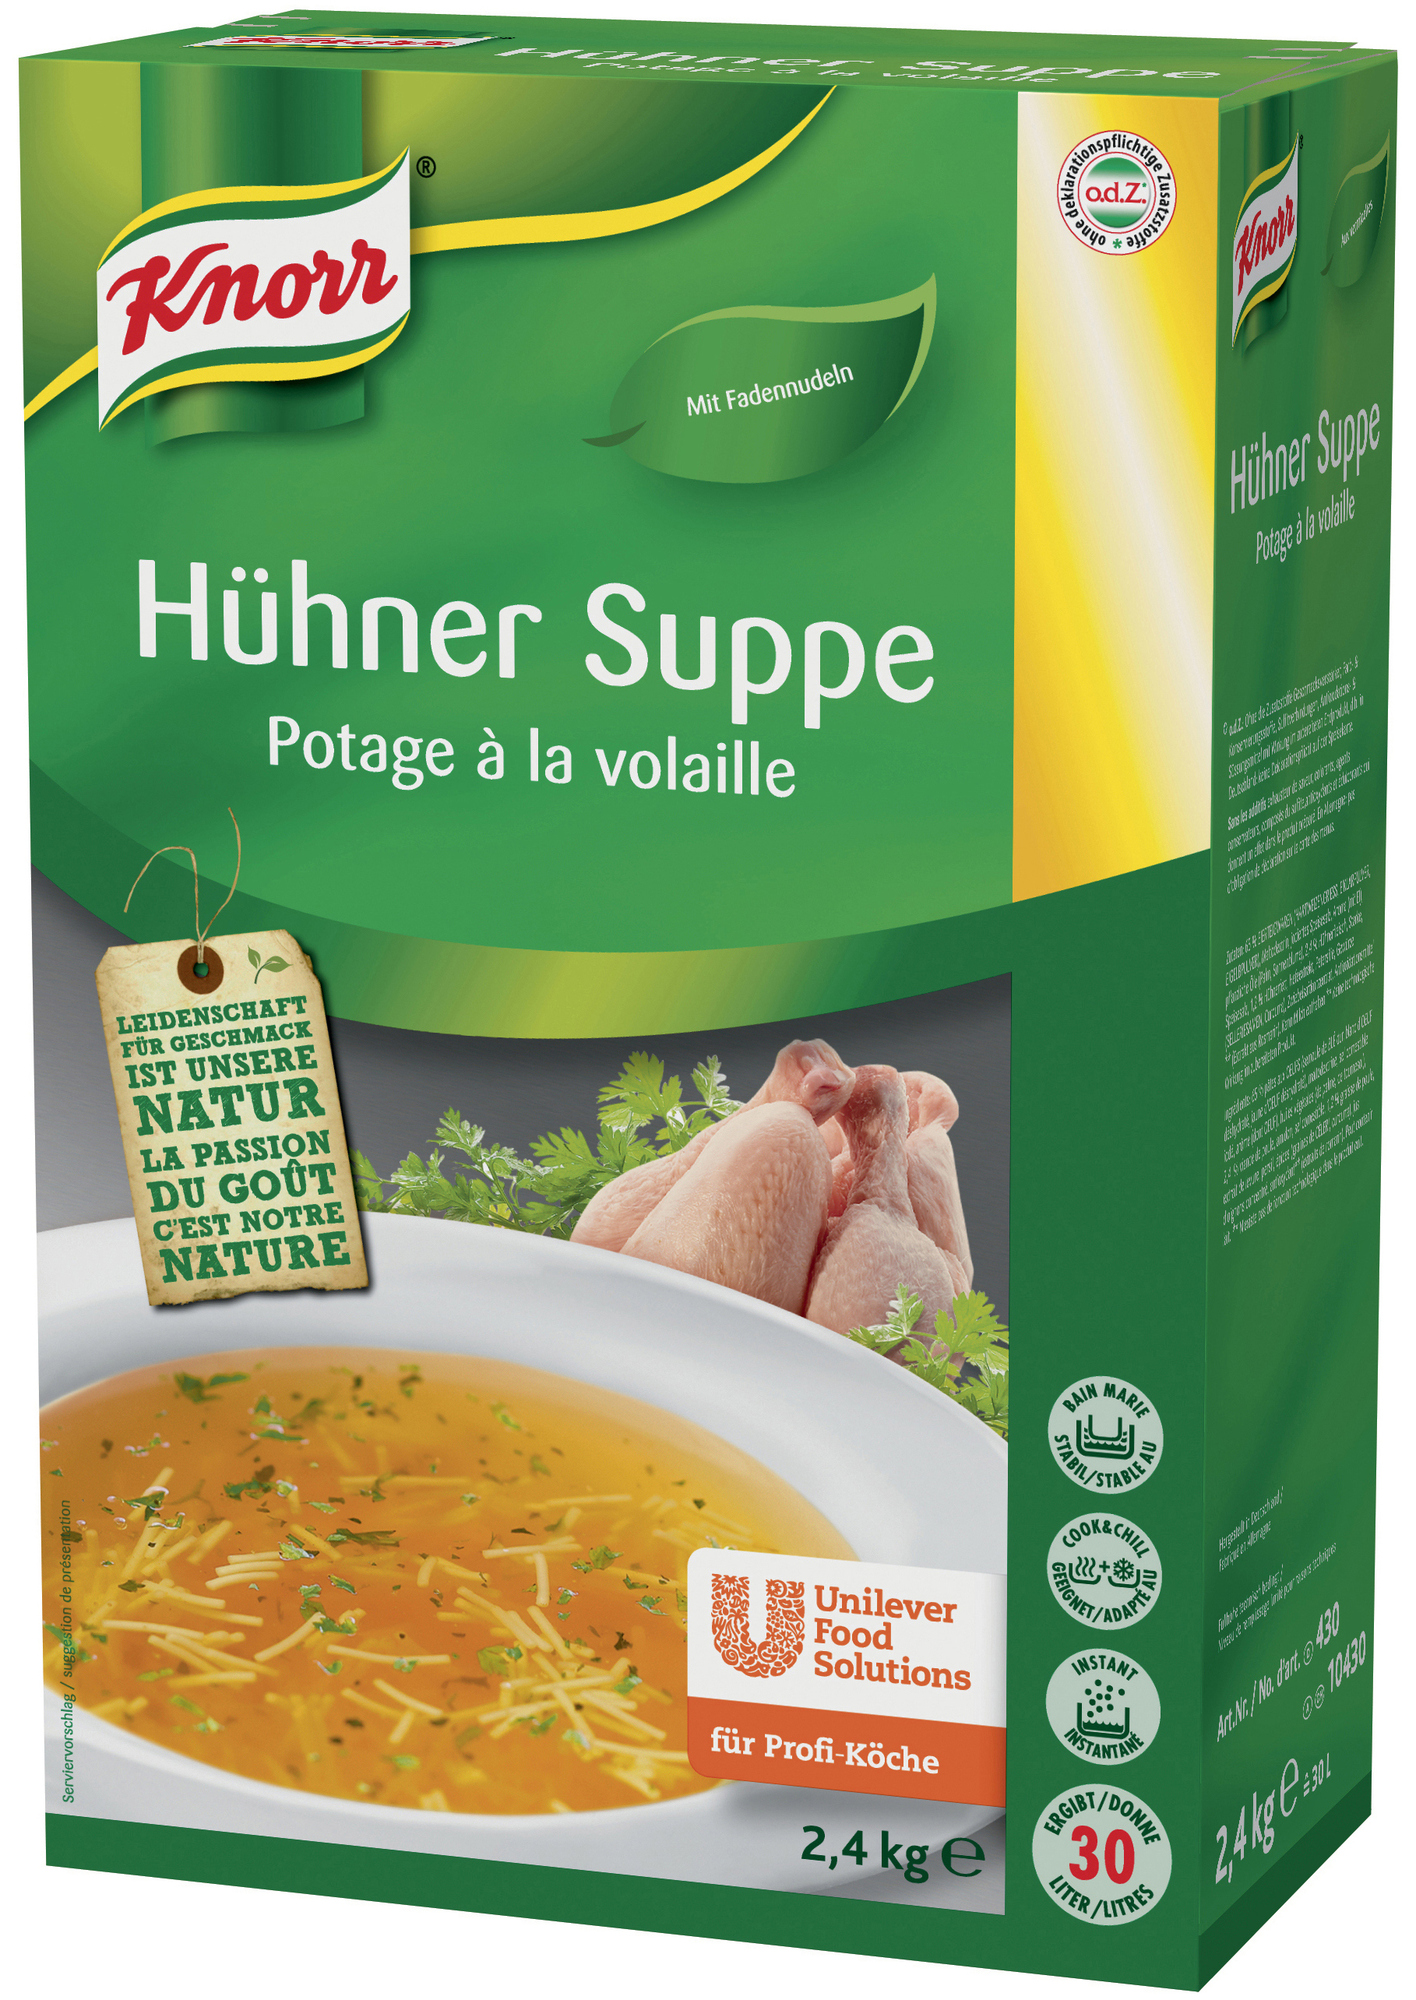 Hühner Suppe 2400g